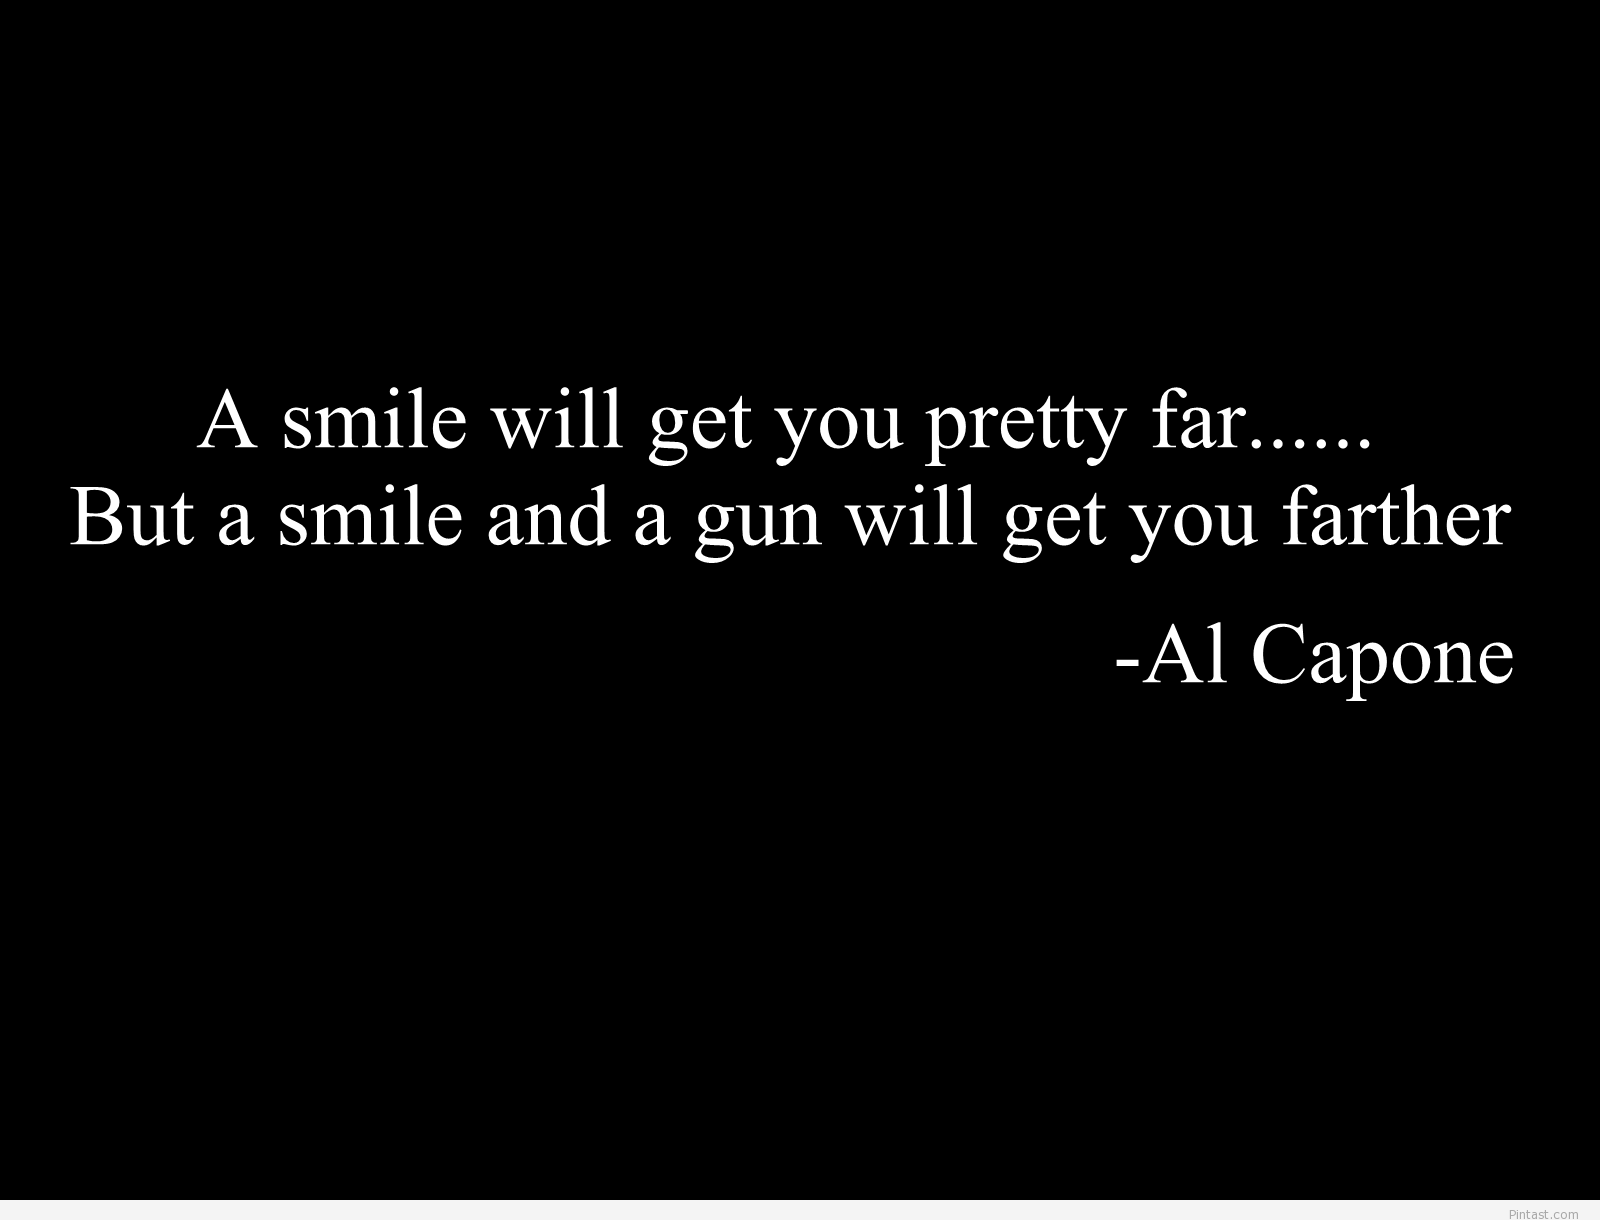 Funny HD Wallpaper With Al Capone Quote Pintast